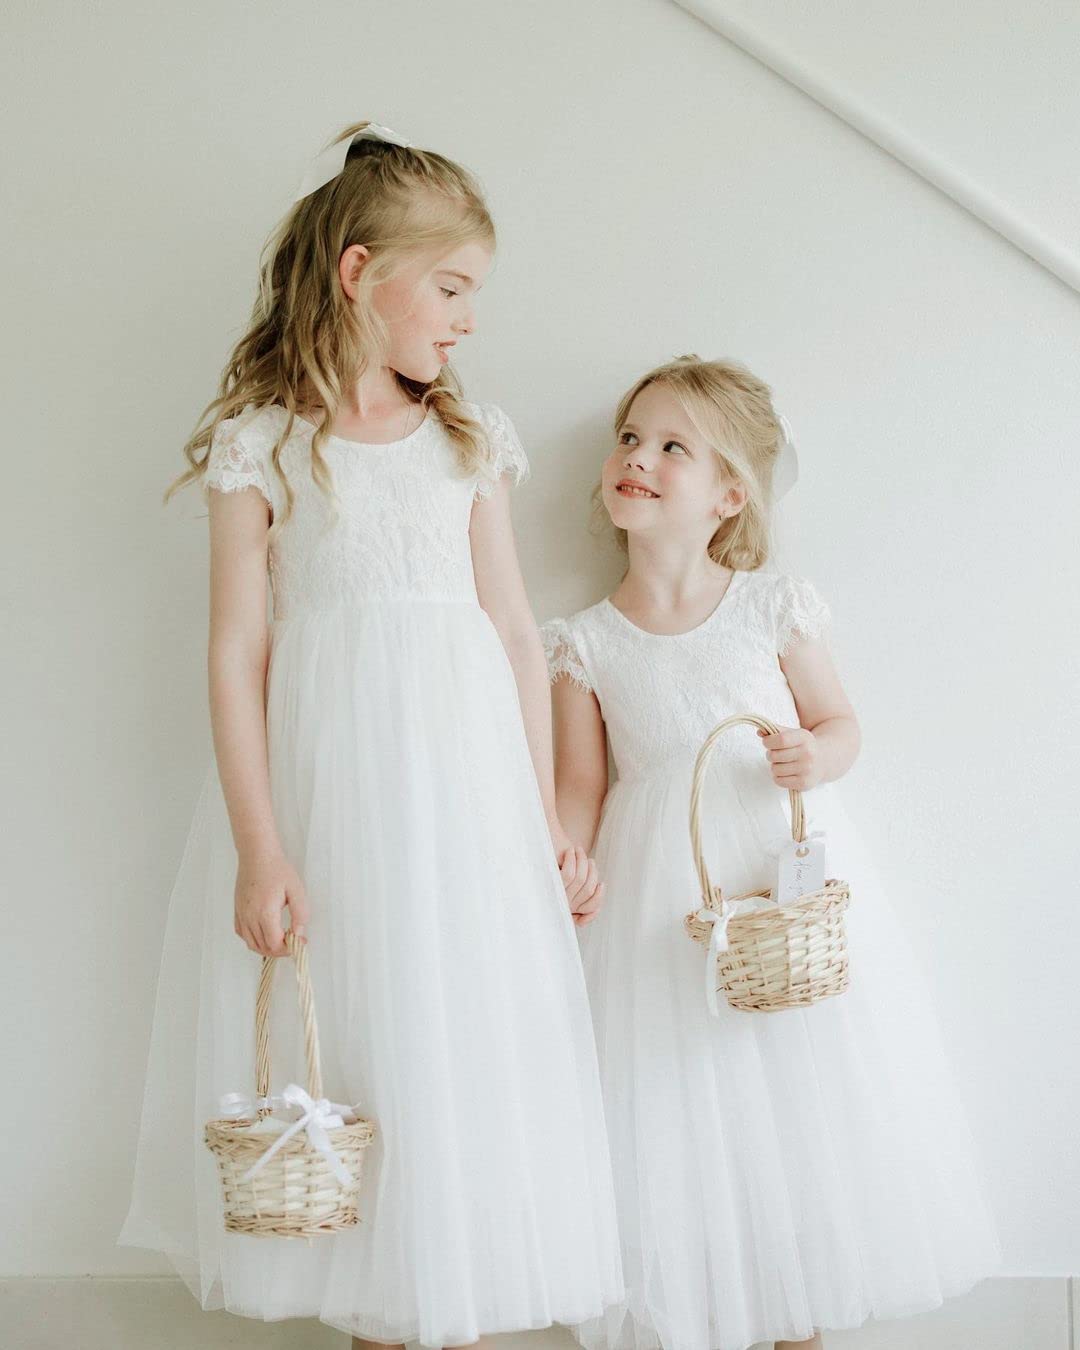 2Bunnies Flower Girl Dress Paisley Lace Back A-Line Short Sleeve Straight Tulle Maxi (White) - 2BUNNIES